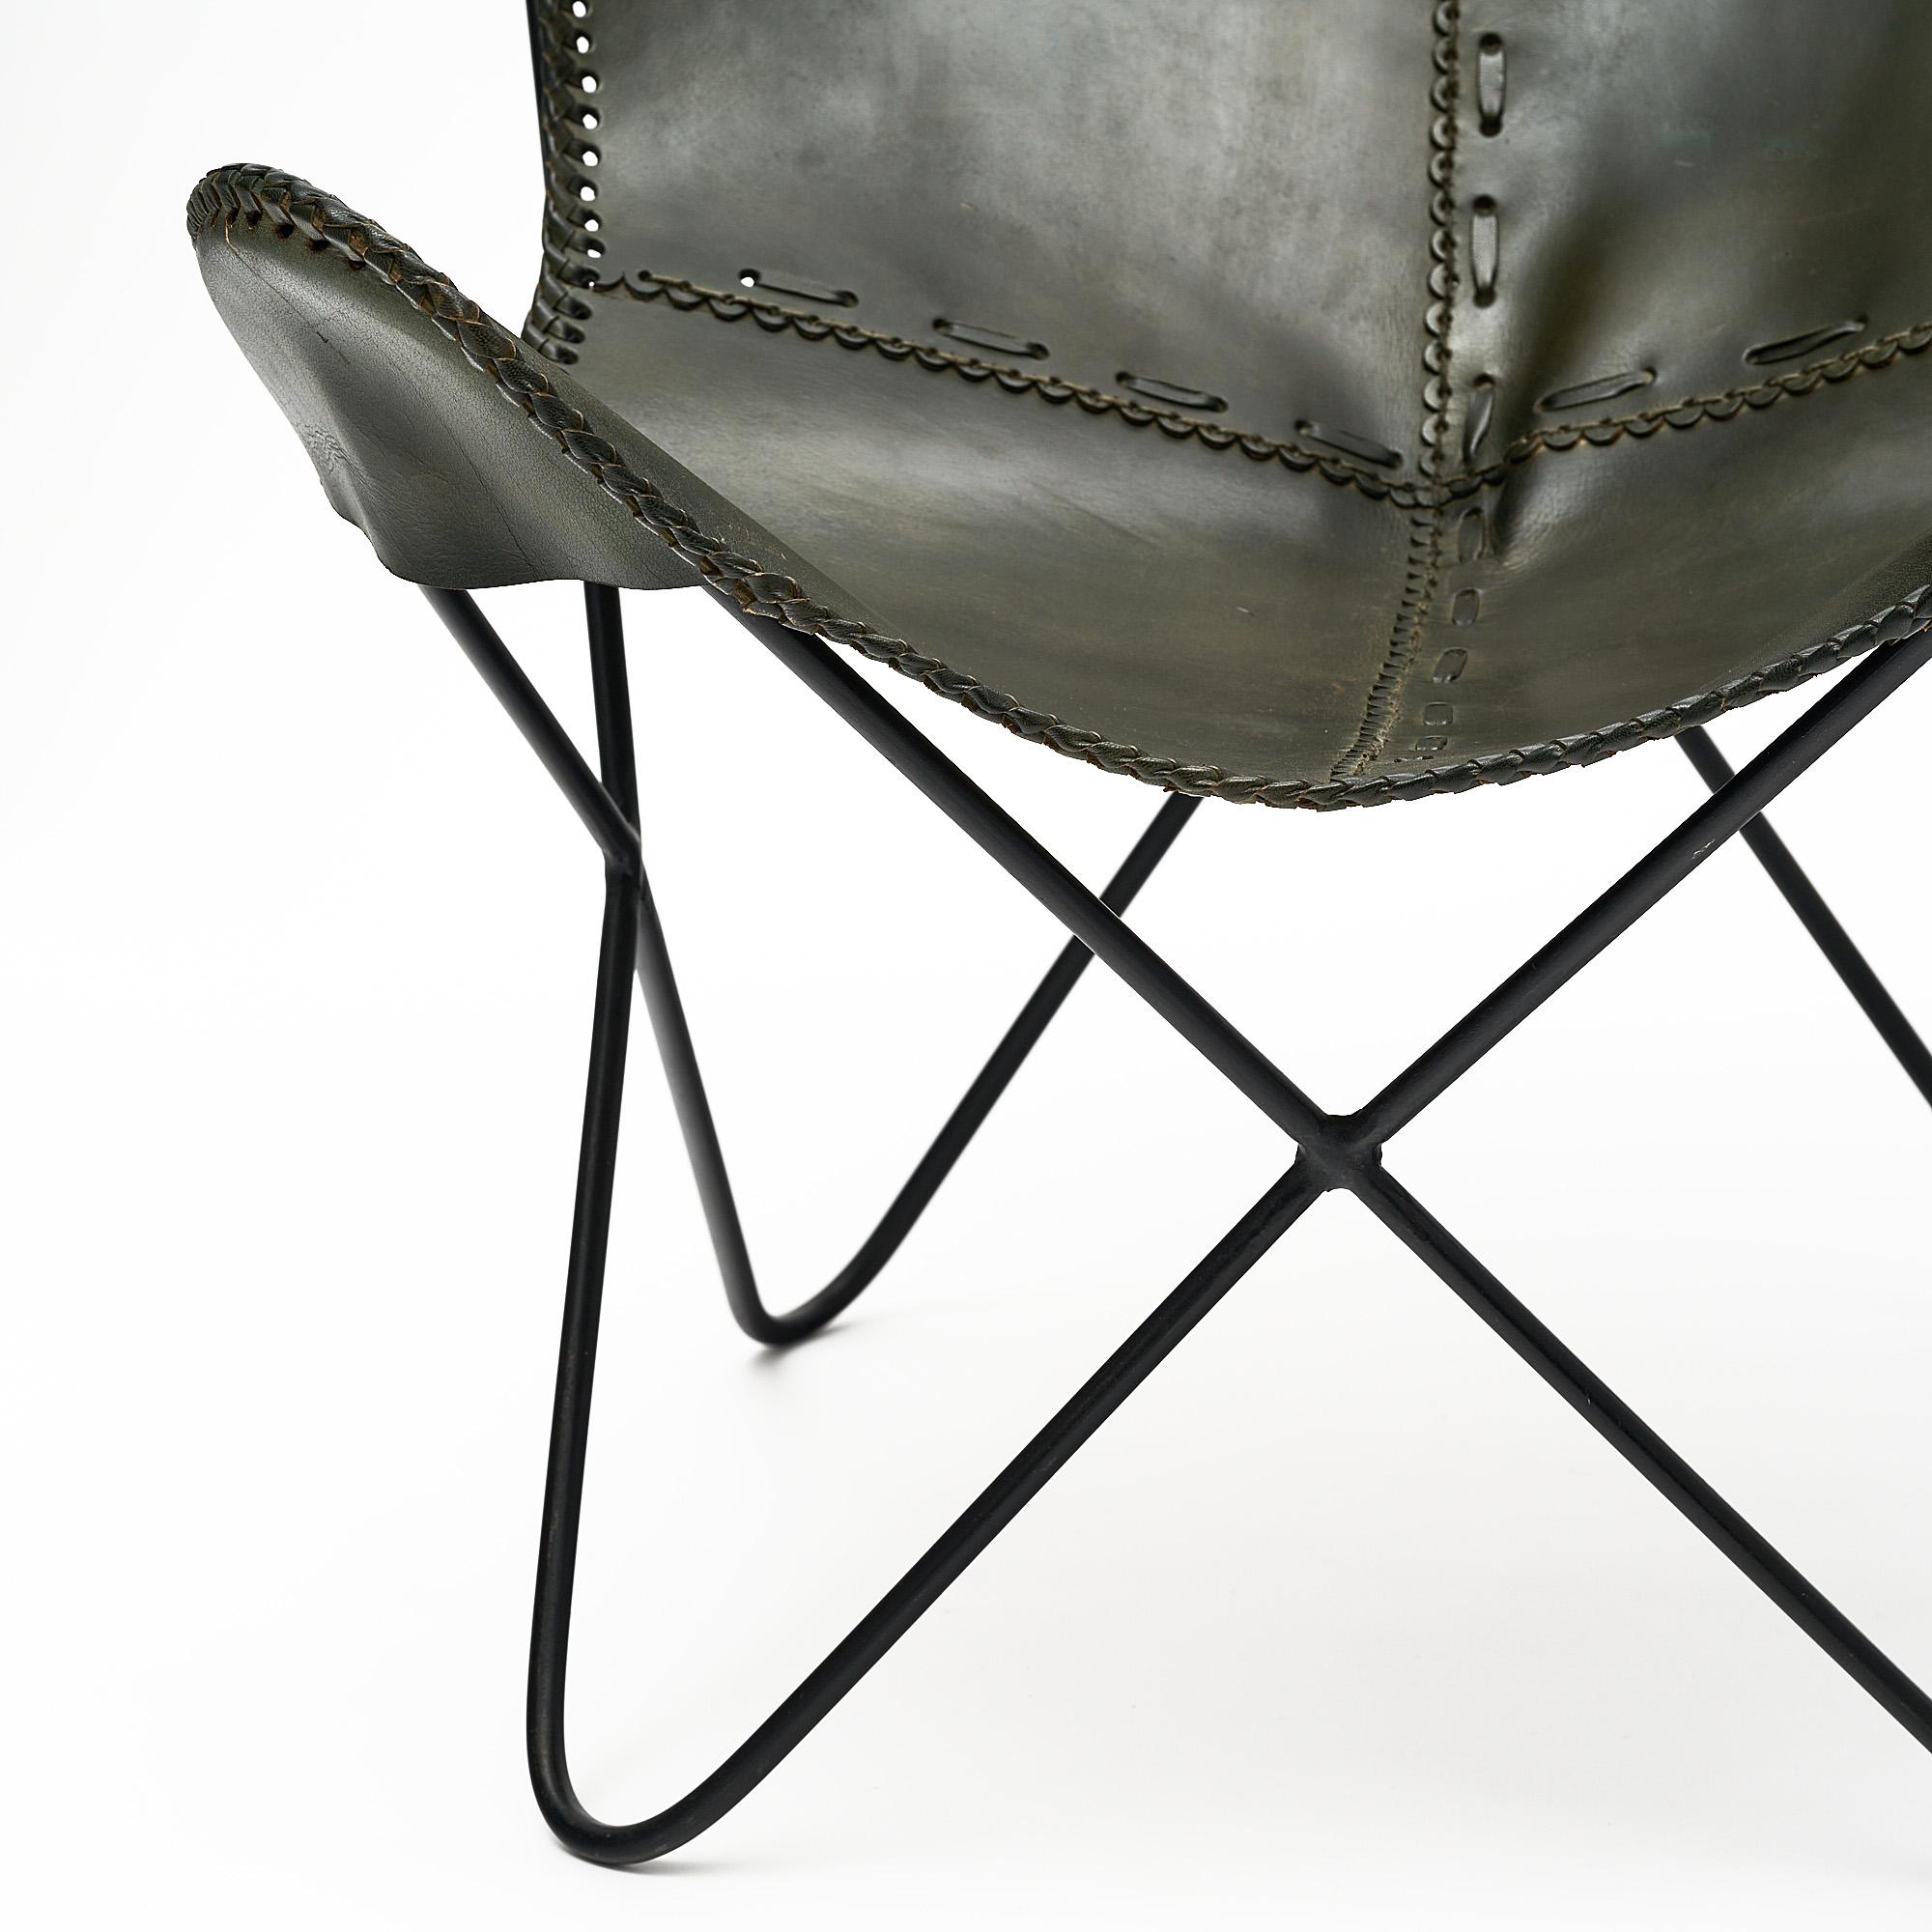 Late 20th Century Butterfly Chair by Jorge Ferrari Hardoy for Knoll